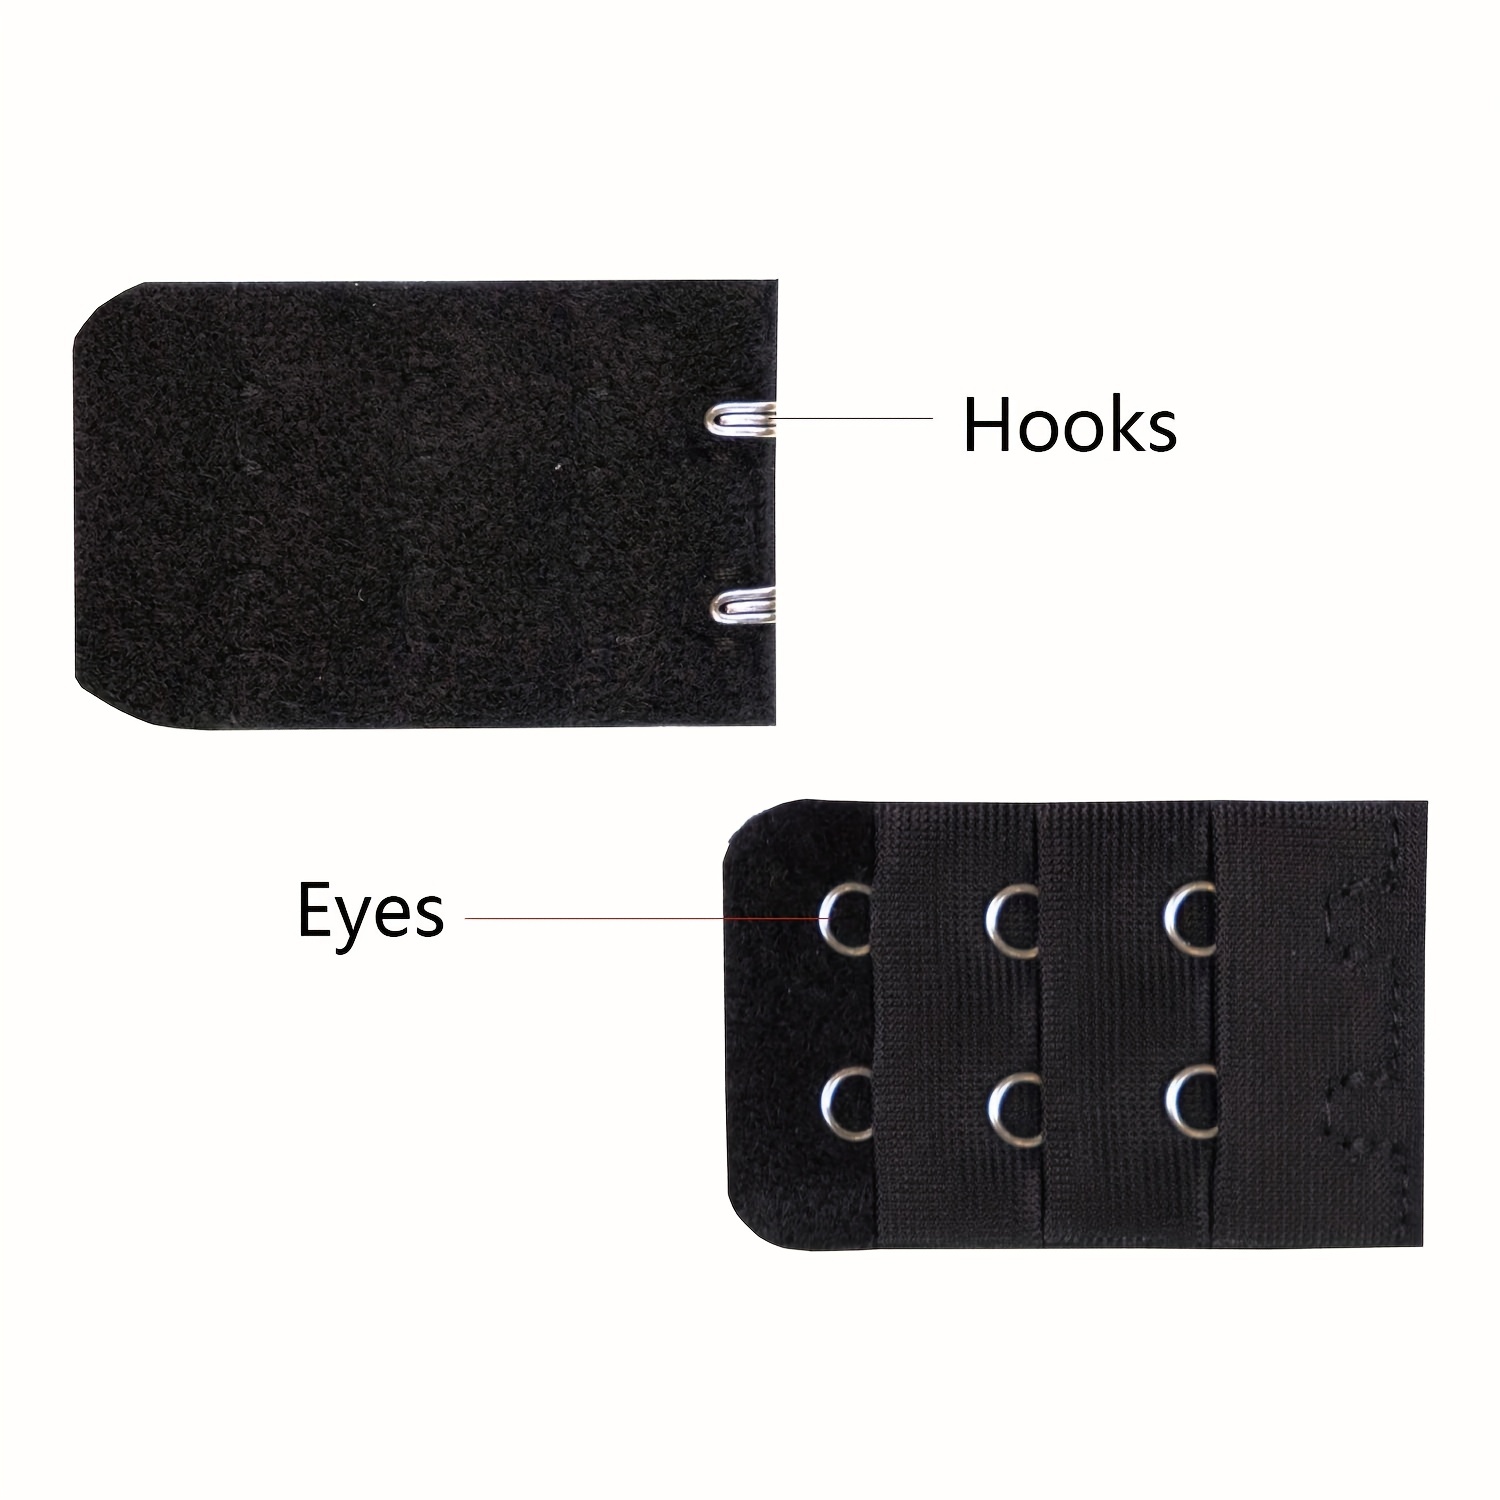 50 pcs Sewing Hooks and Eyes Closure Eye Sewing Closure for Bra